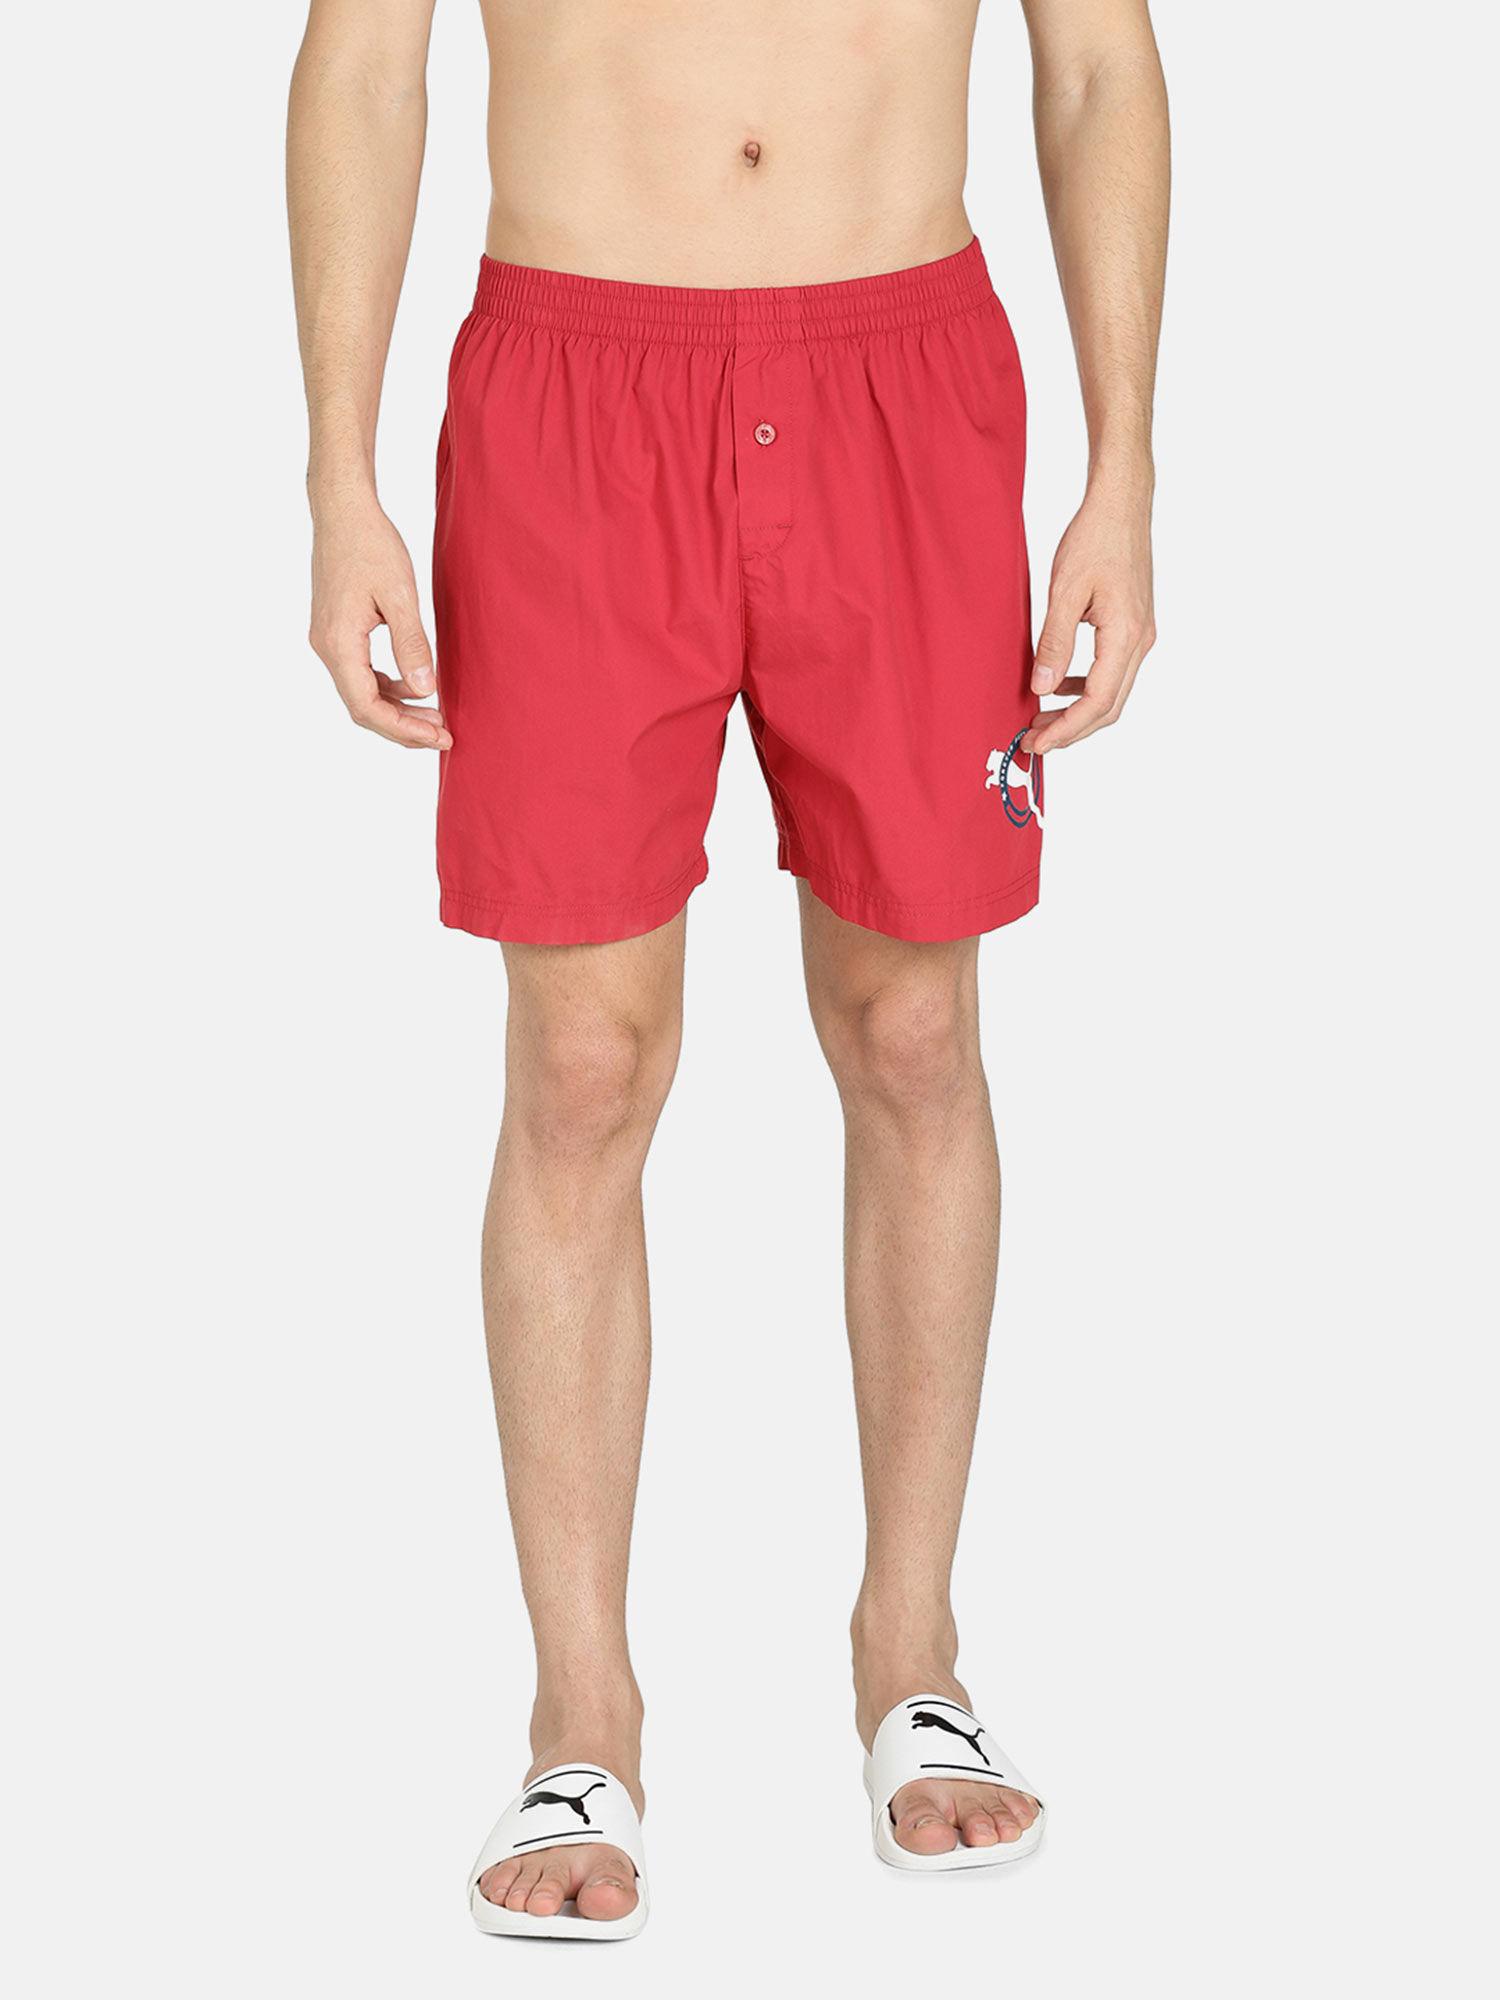 basic-red-woven-boxer